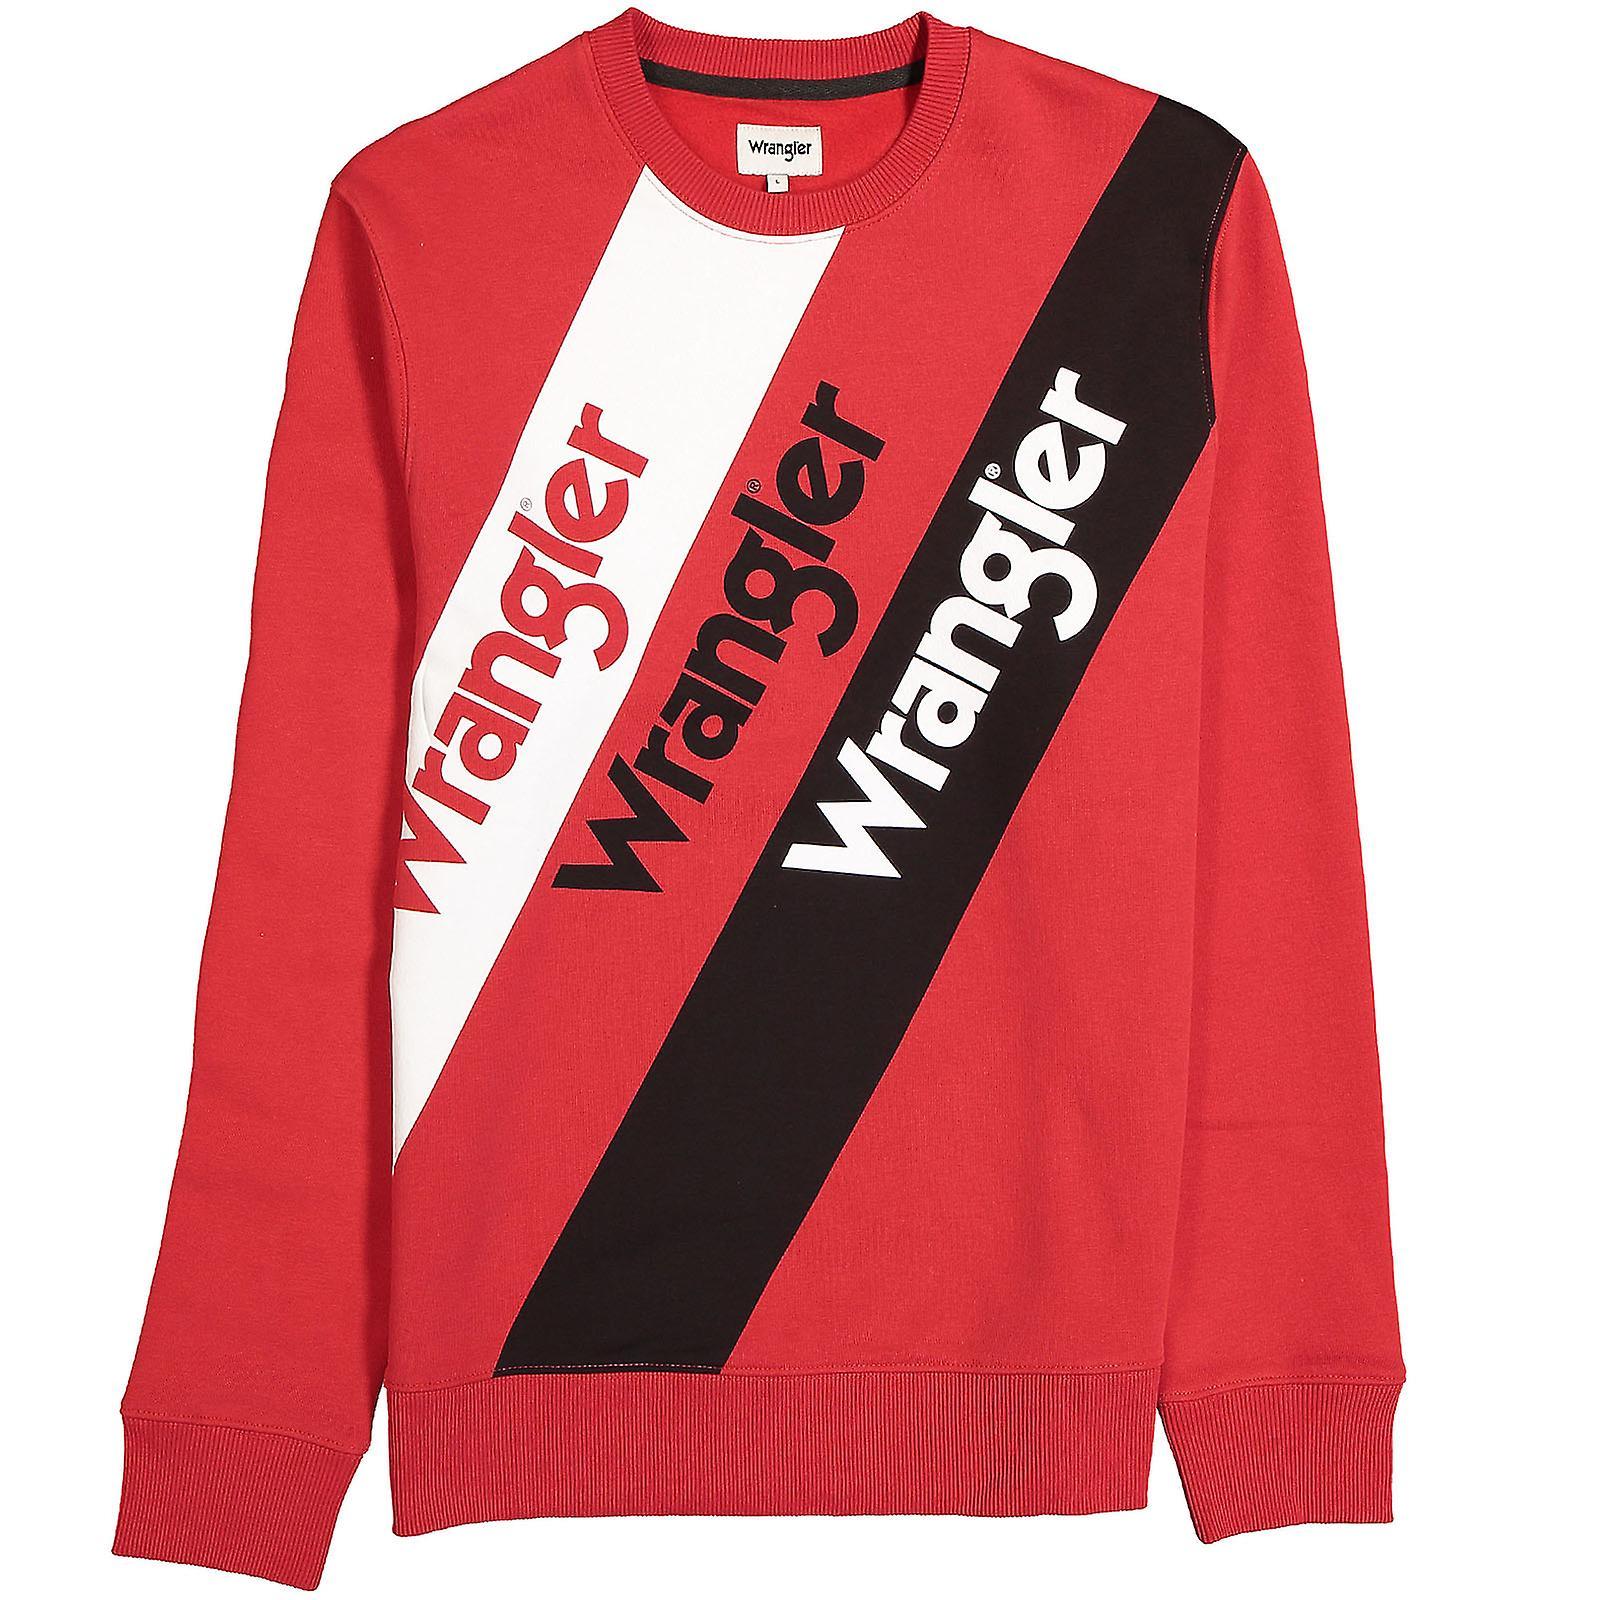 Red and White for the W Logo - Wrangler Mens W Repeat Logo Crew Neck Pullover Jumper Sweatshirt Top